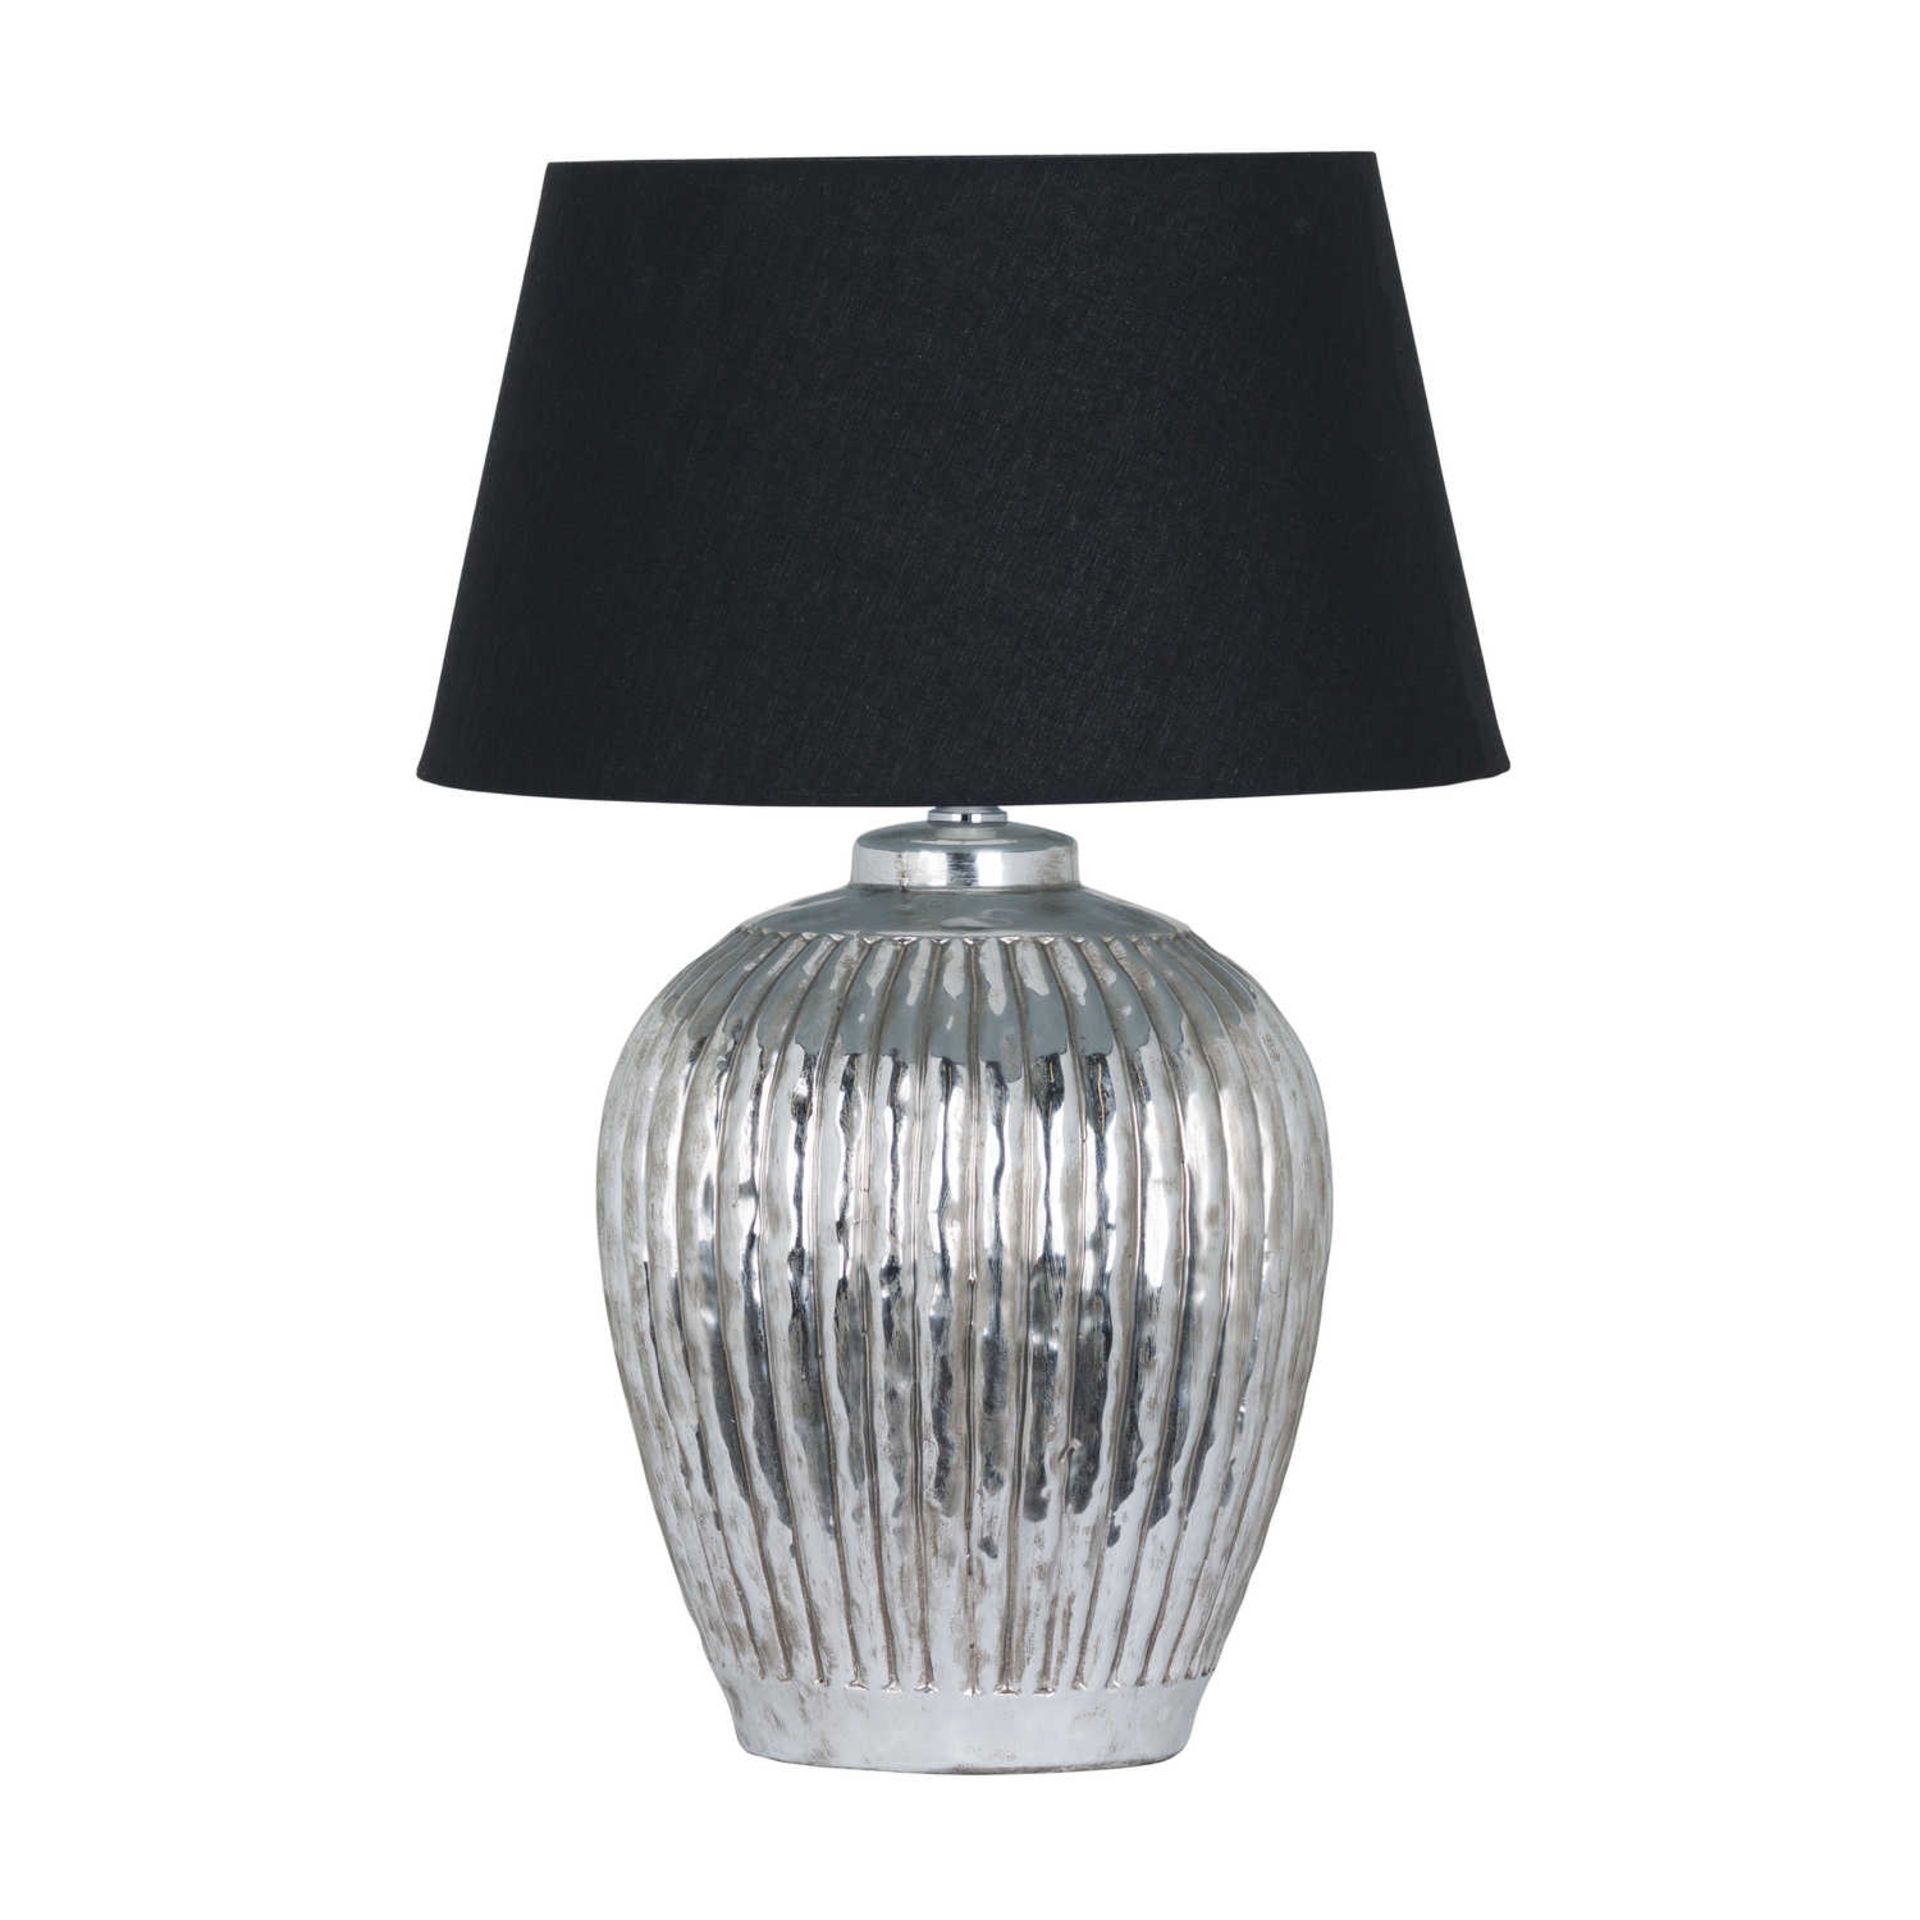 Bellagio Silver Ceramic Table Lamp base only gorgeous Bellagio Silver Ceramic Table Lamp Base,